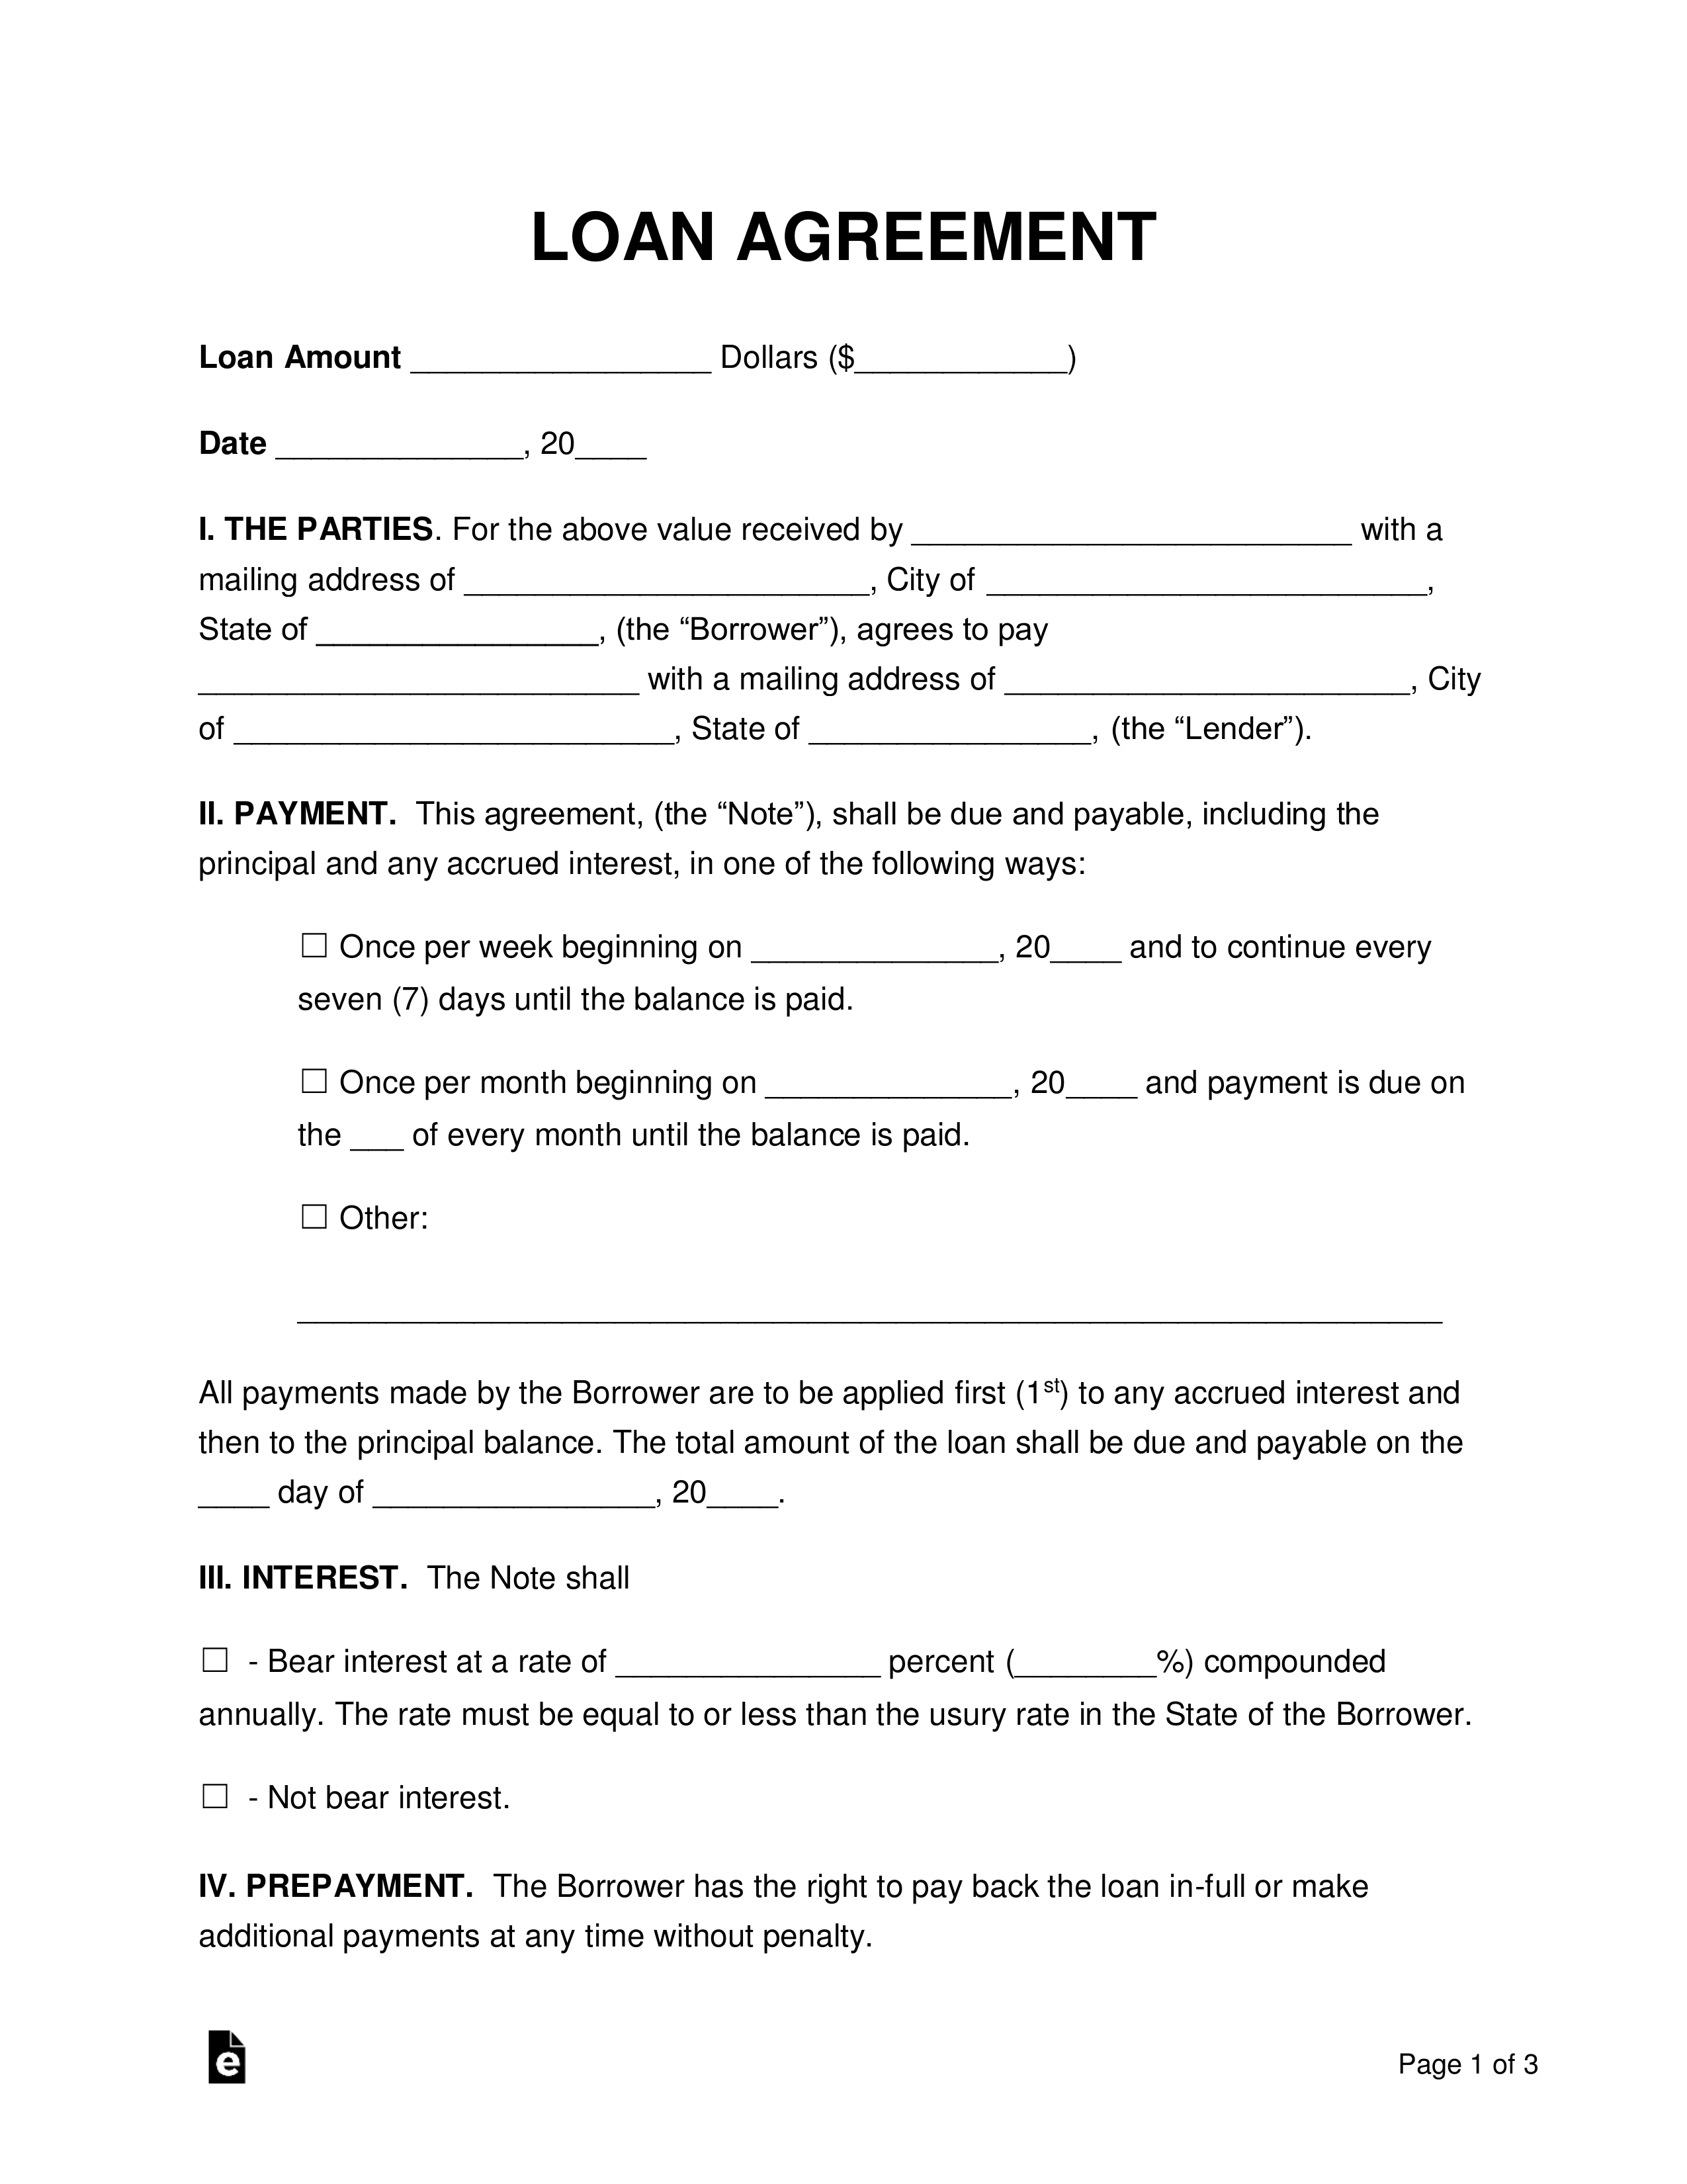 Free Loan Agreement Templates – Pdf | Word | Eforms – Free In Blank Loan Agreement Template